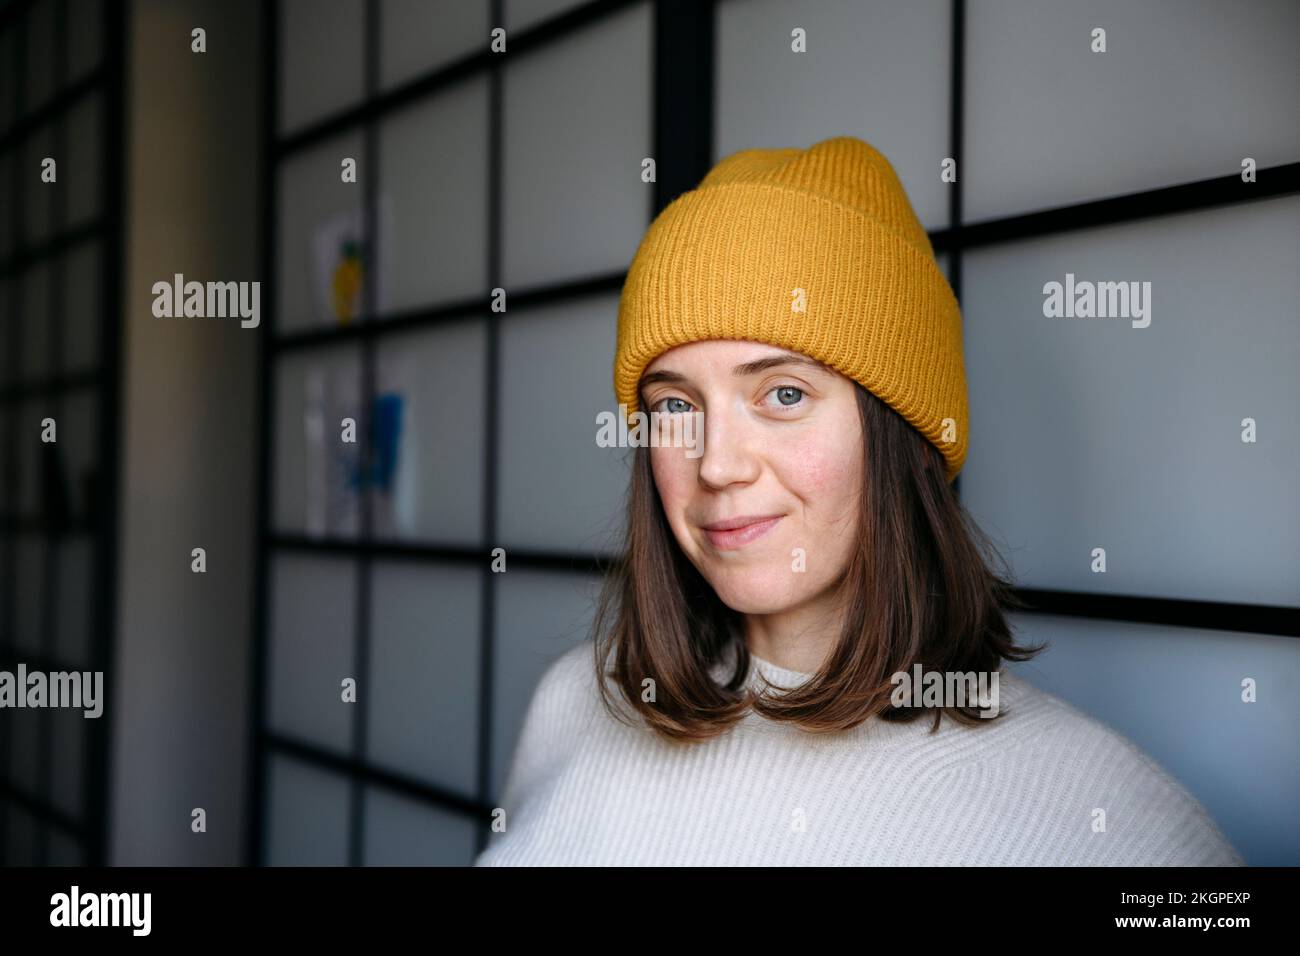 Smiling woman wearing knit hat at home Stock Photo